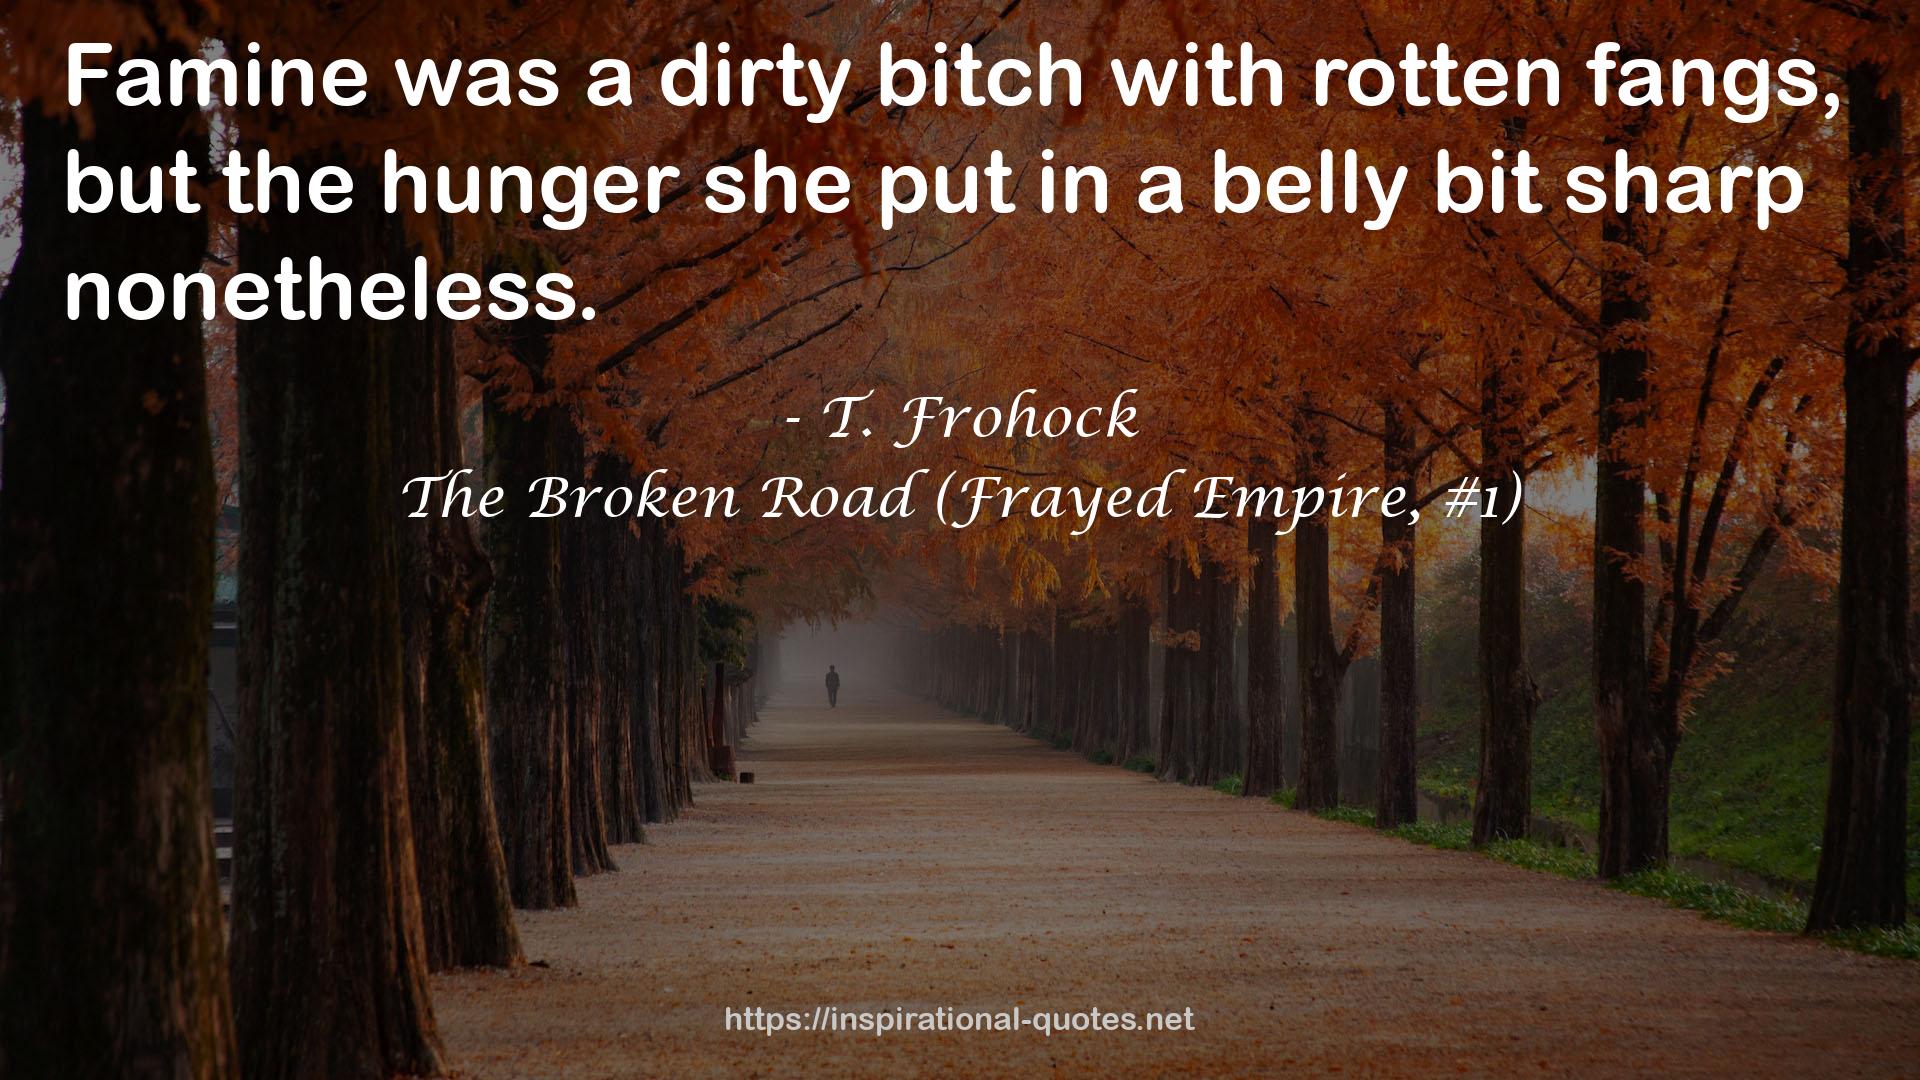 The Broken Road (Frayed Empire, #1) QUOTES